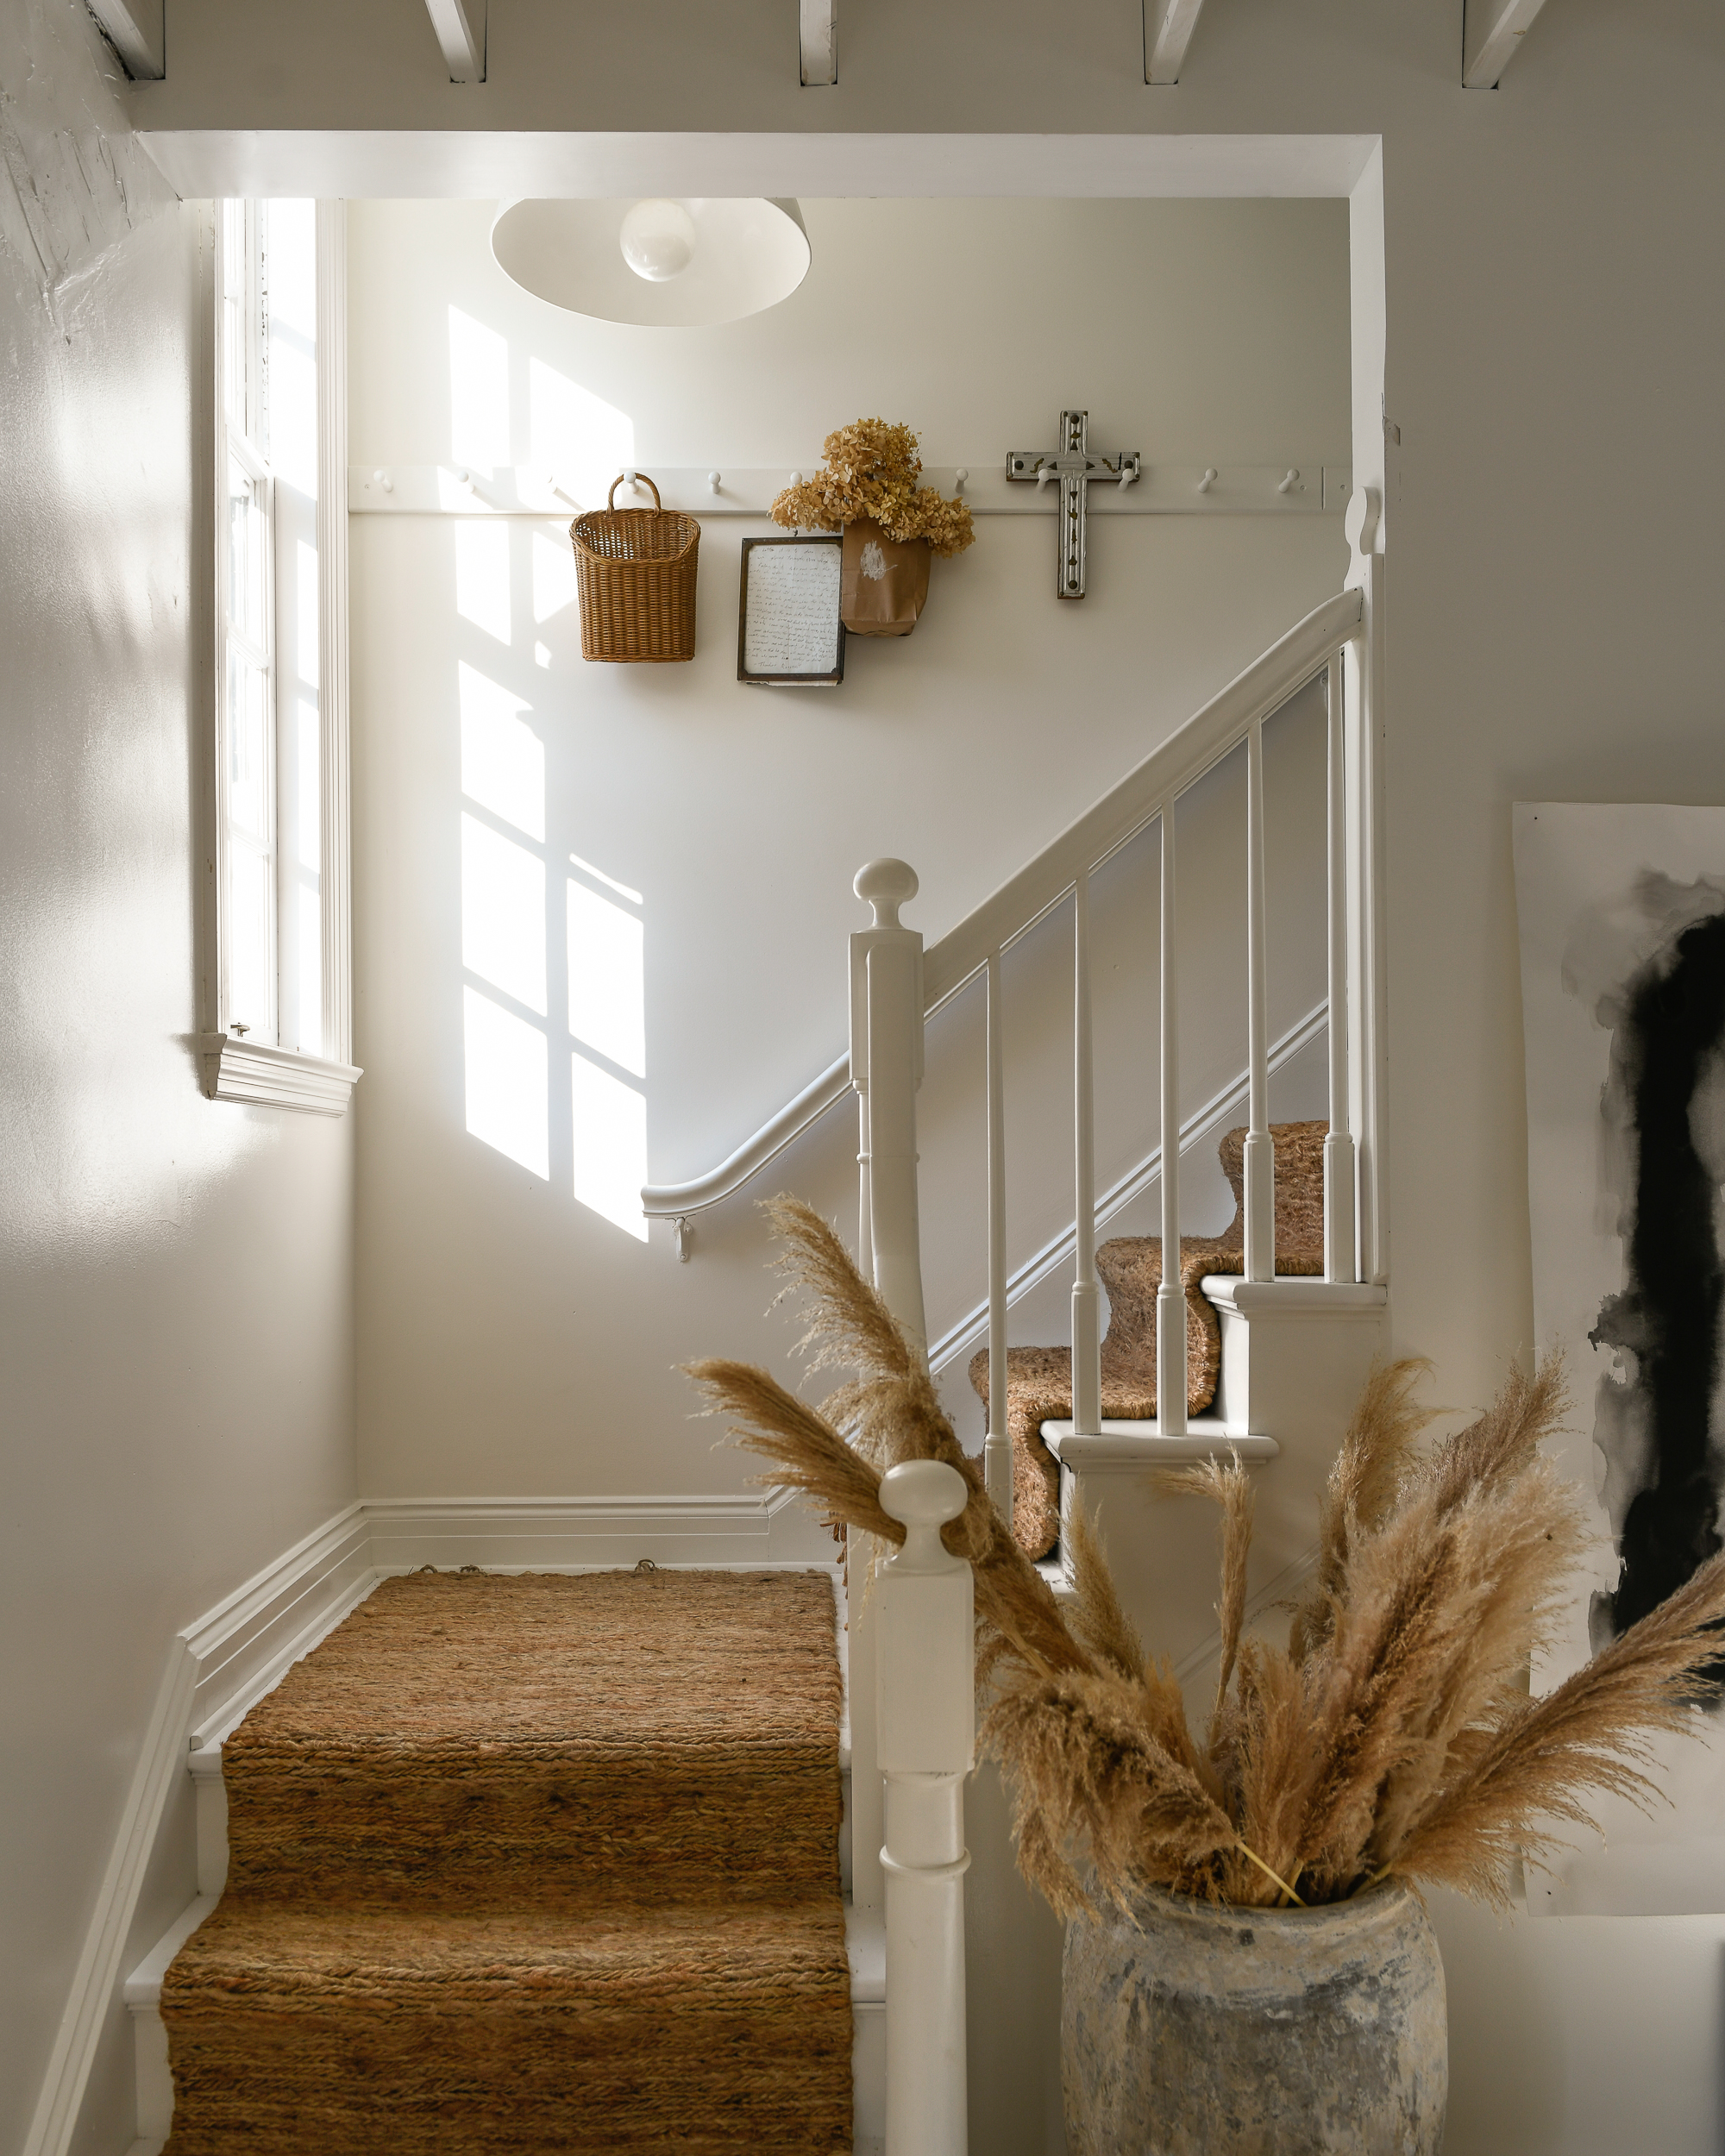 Leanne Ford’s stairway with walls painted in Natural White and styled with brown accents